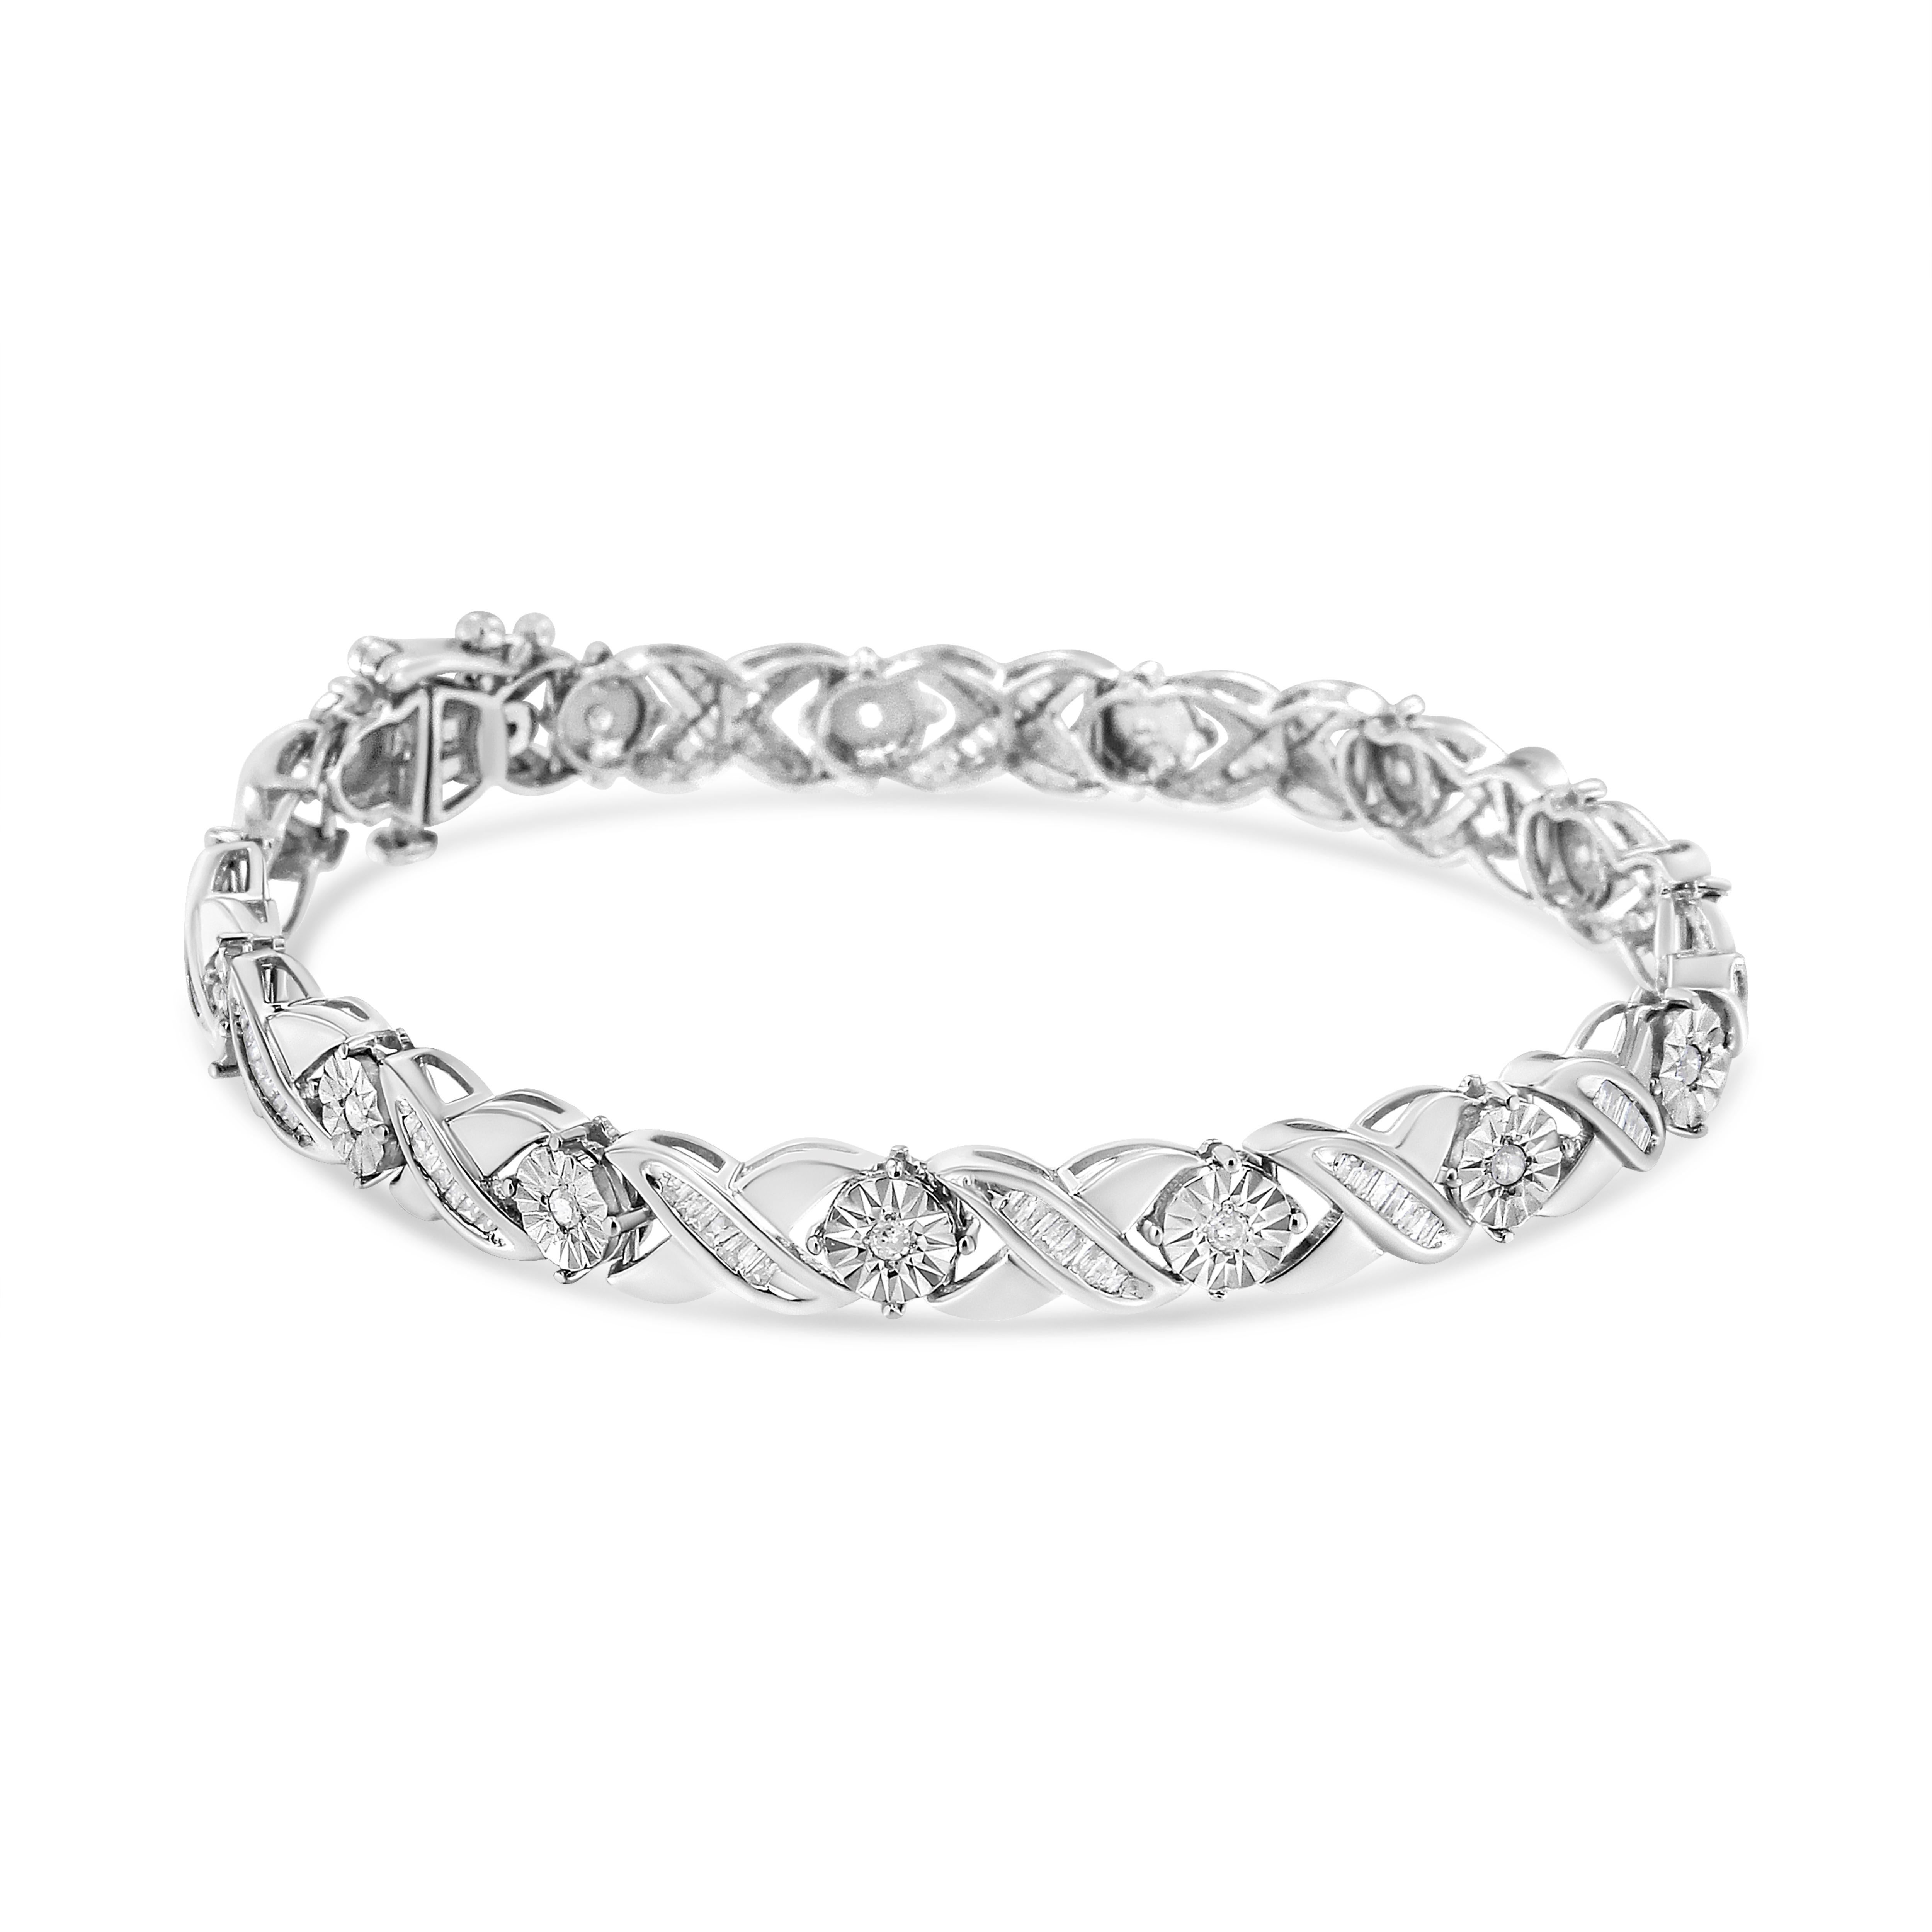 Elegant and timeless, this gorgeous sterling silver link bracelet features 1.08 carat total weight of round-brilliant and baguette cut diamonds with 120 stones in all. The tennis bracelet has round stones in our unique miracle-plate setting, which